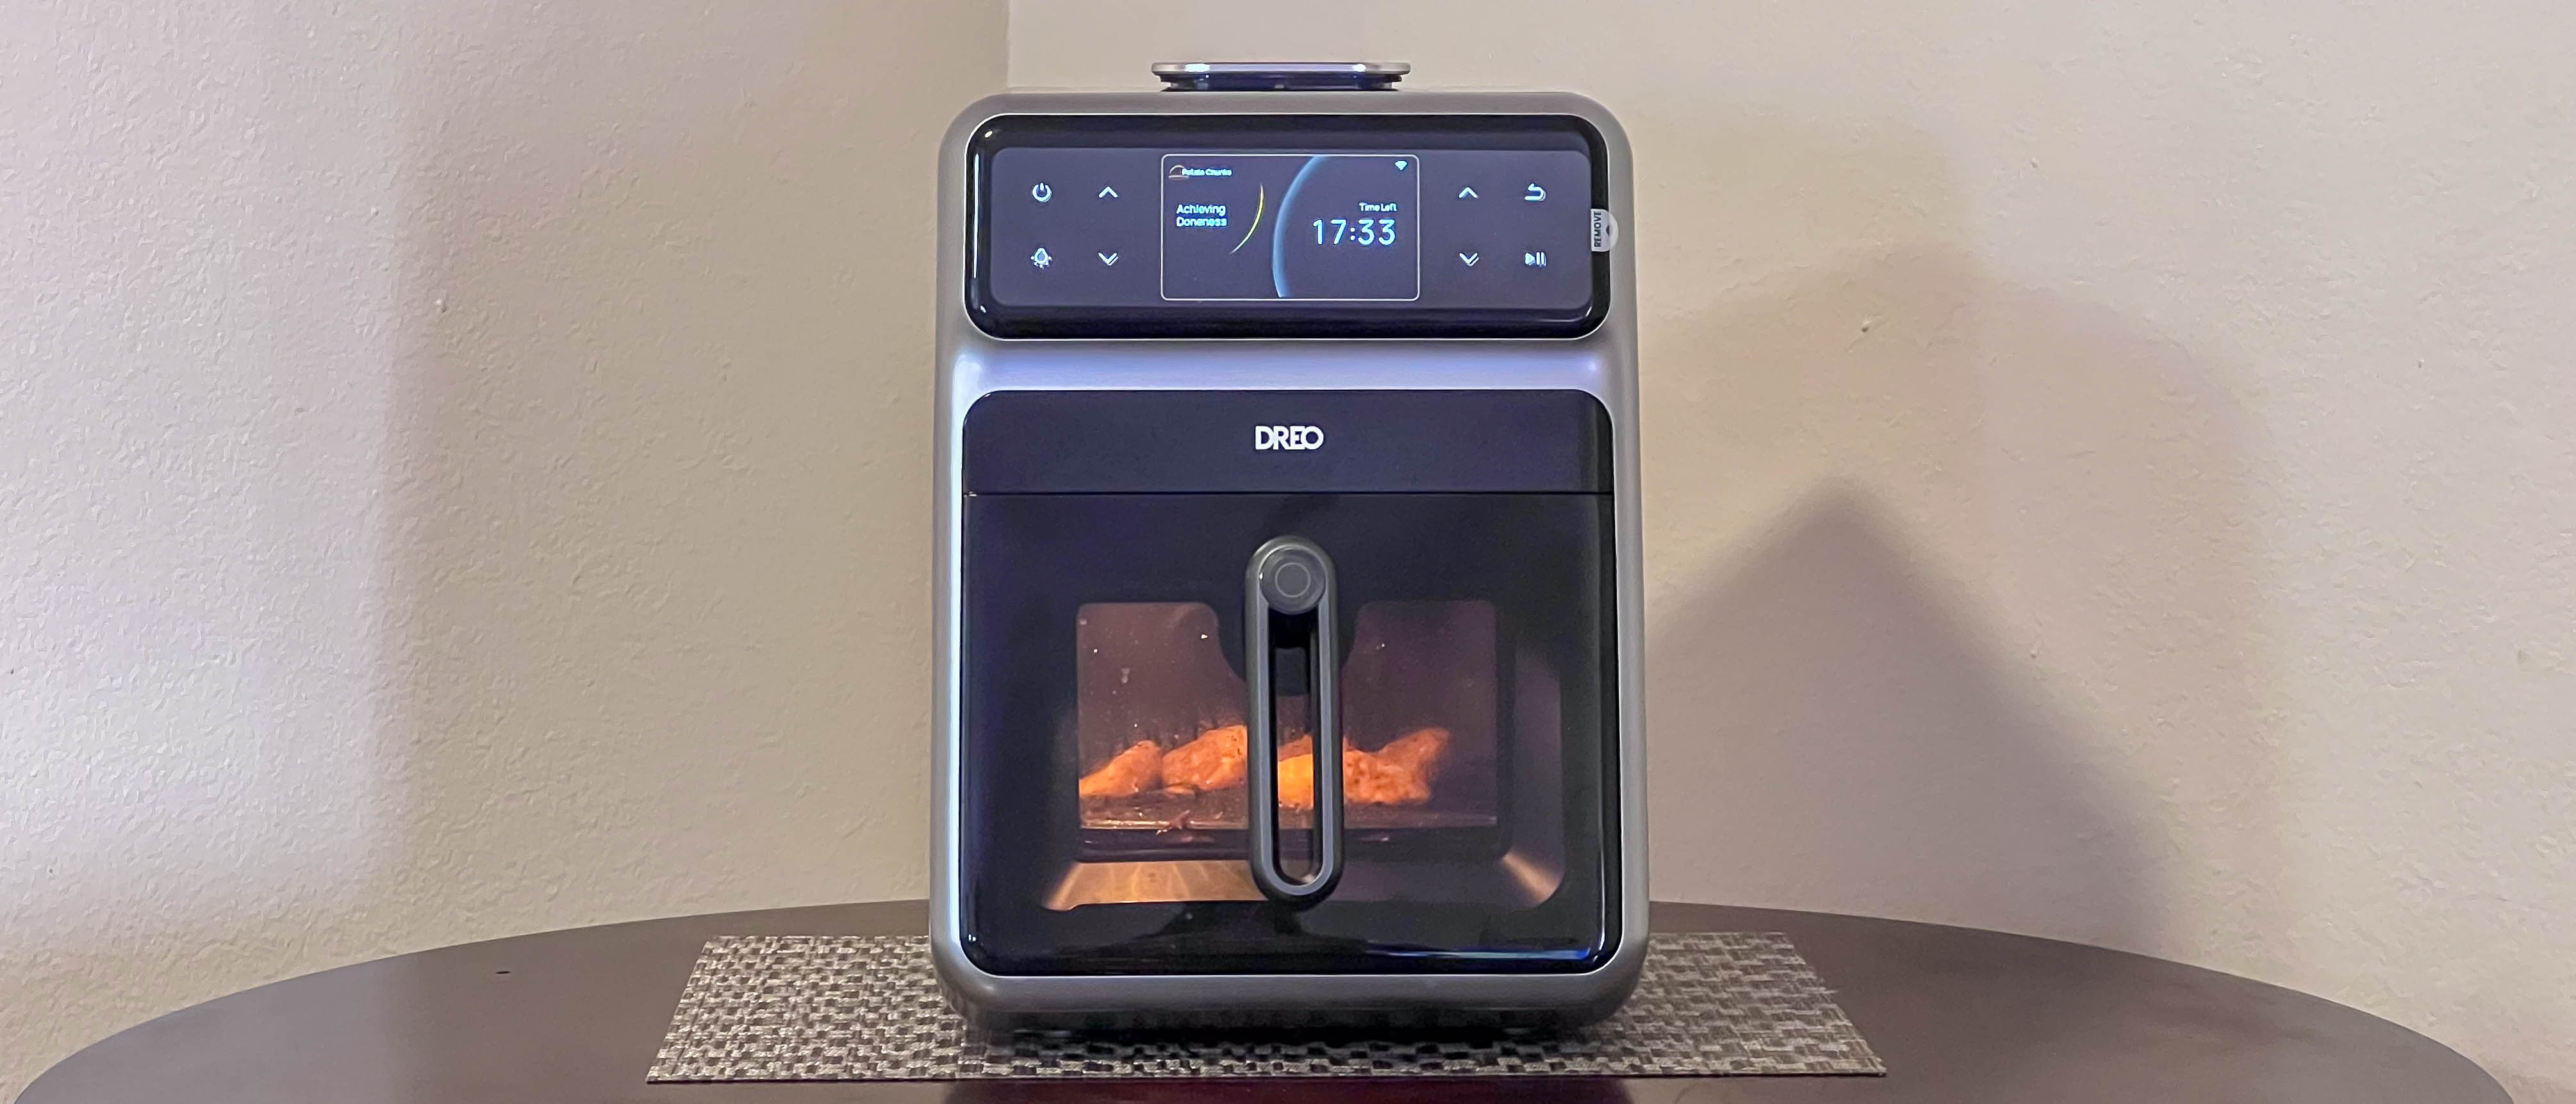 Dreo ChefMaker air fryer review: the best air fryer, but also more